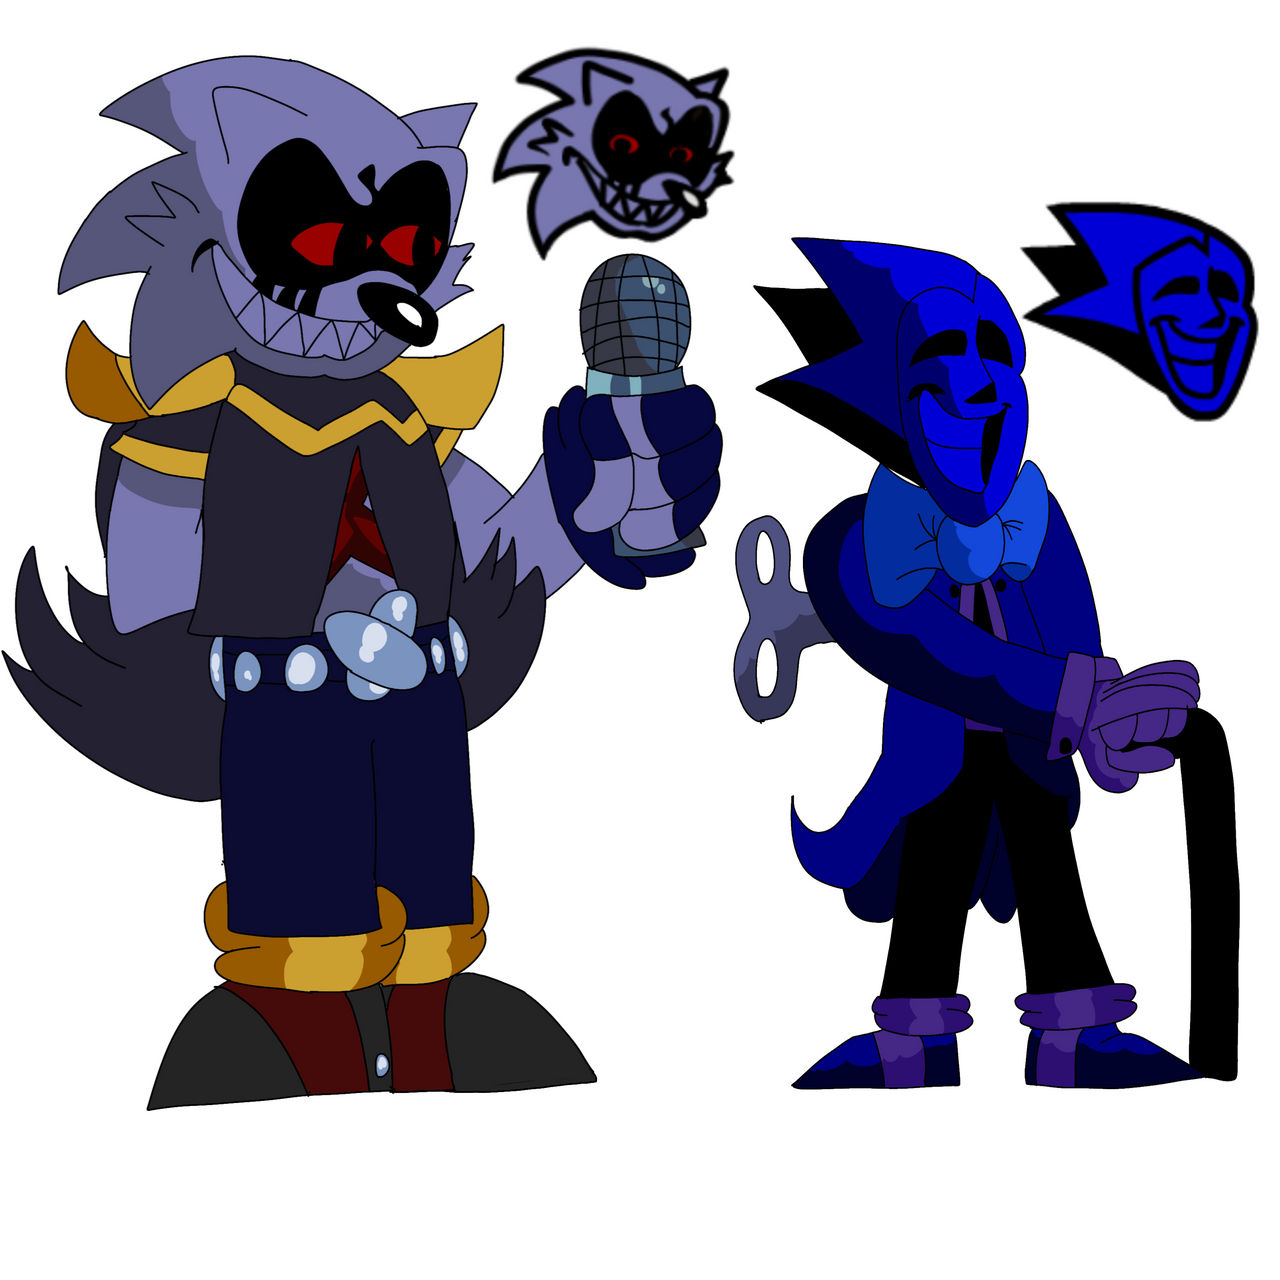 Lord x/Sonic exe by sharktrexl on DeviantArt